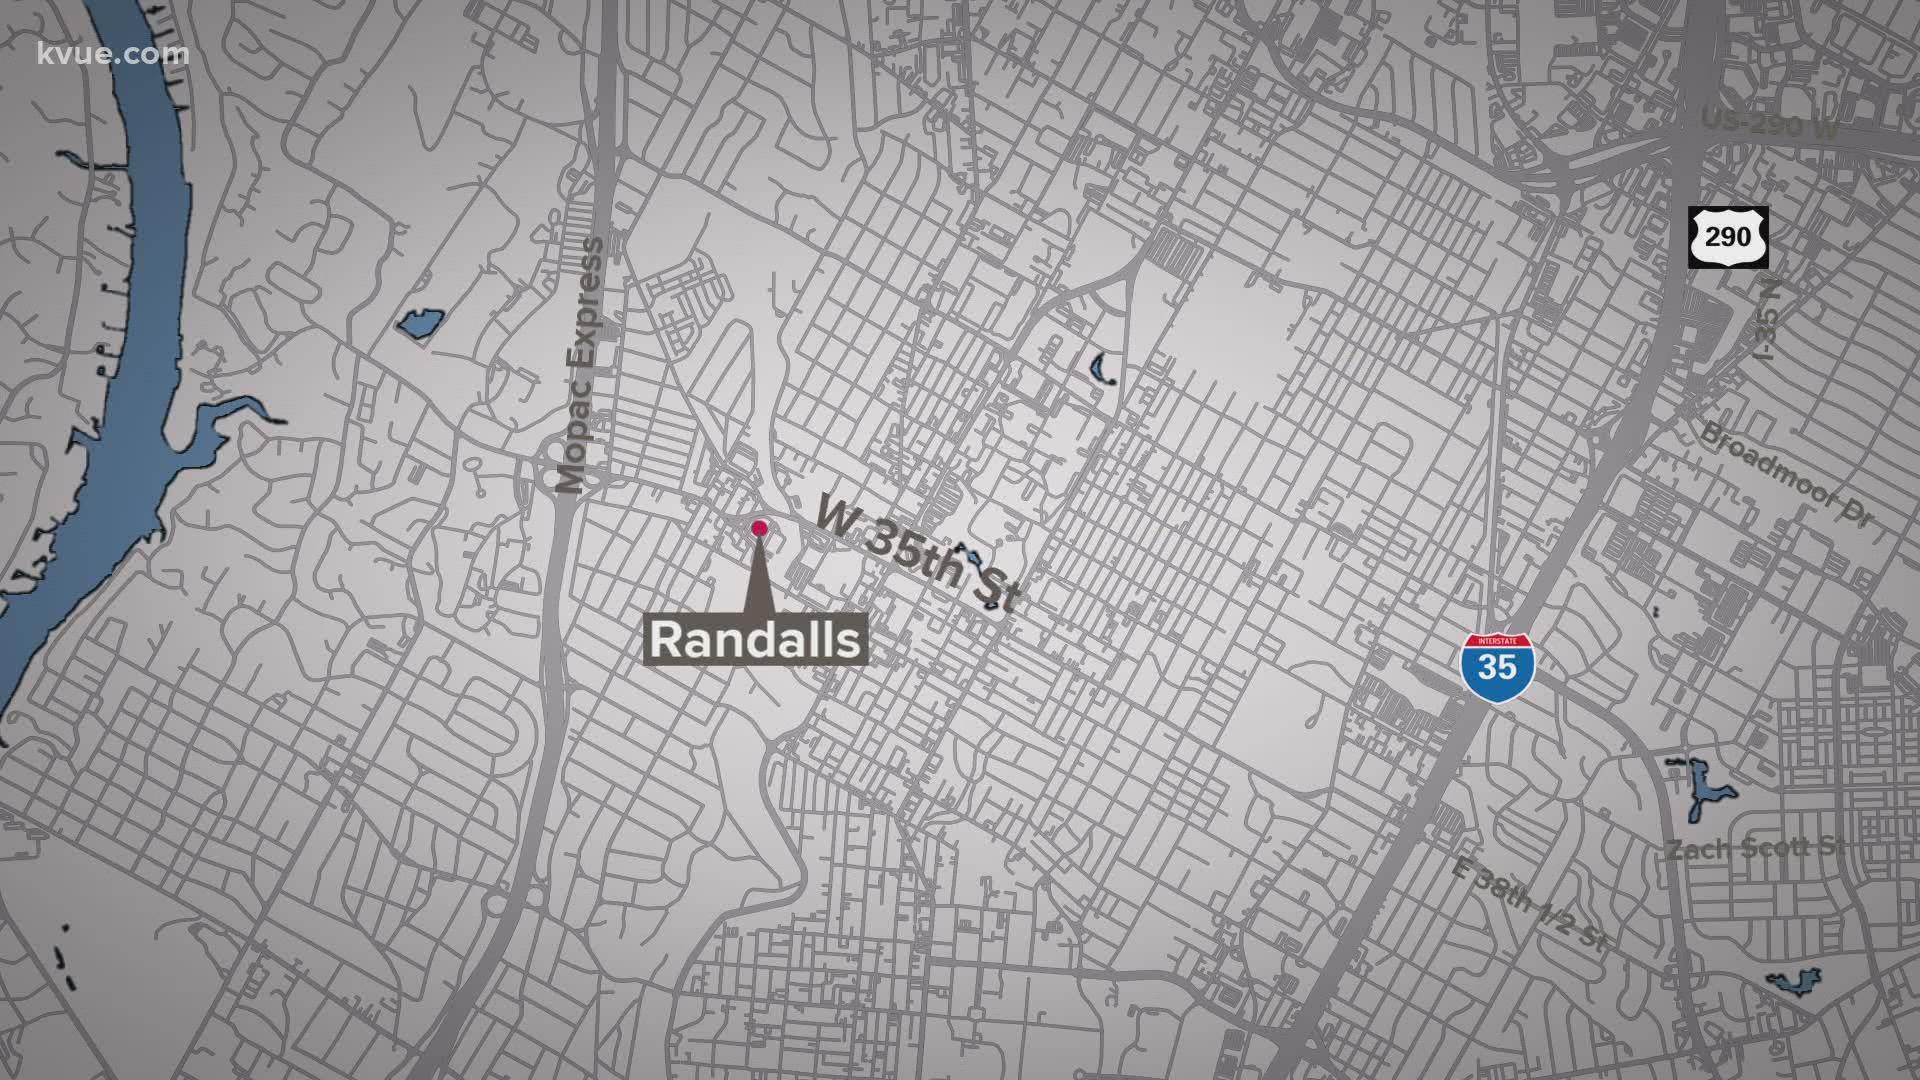 Randalls will close its West 35th Street location on or before Nov. 6. The building will be turned into a mixed-use development.